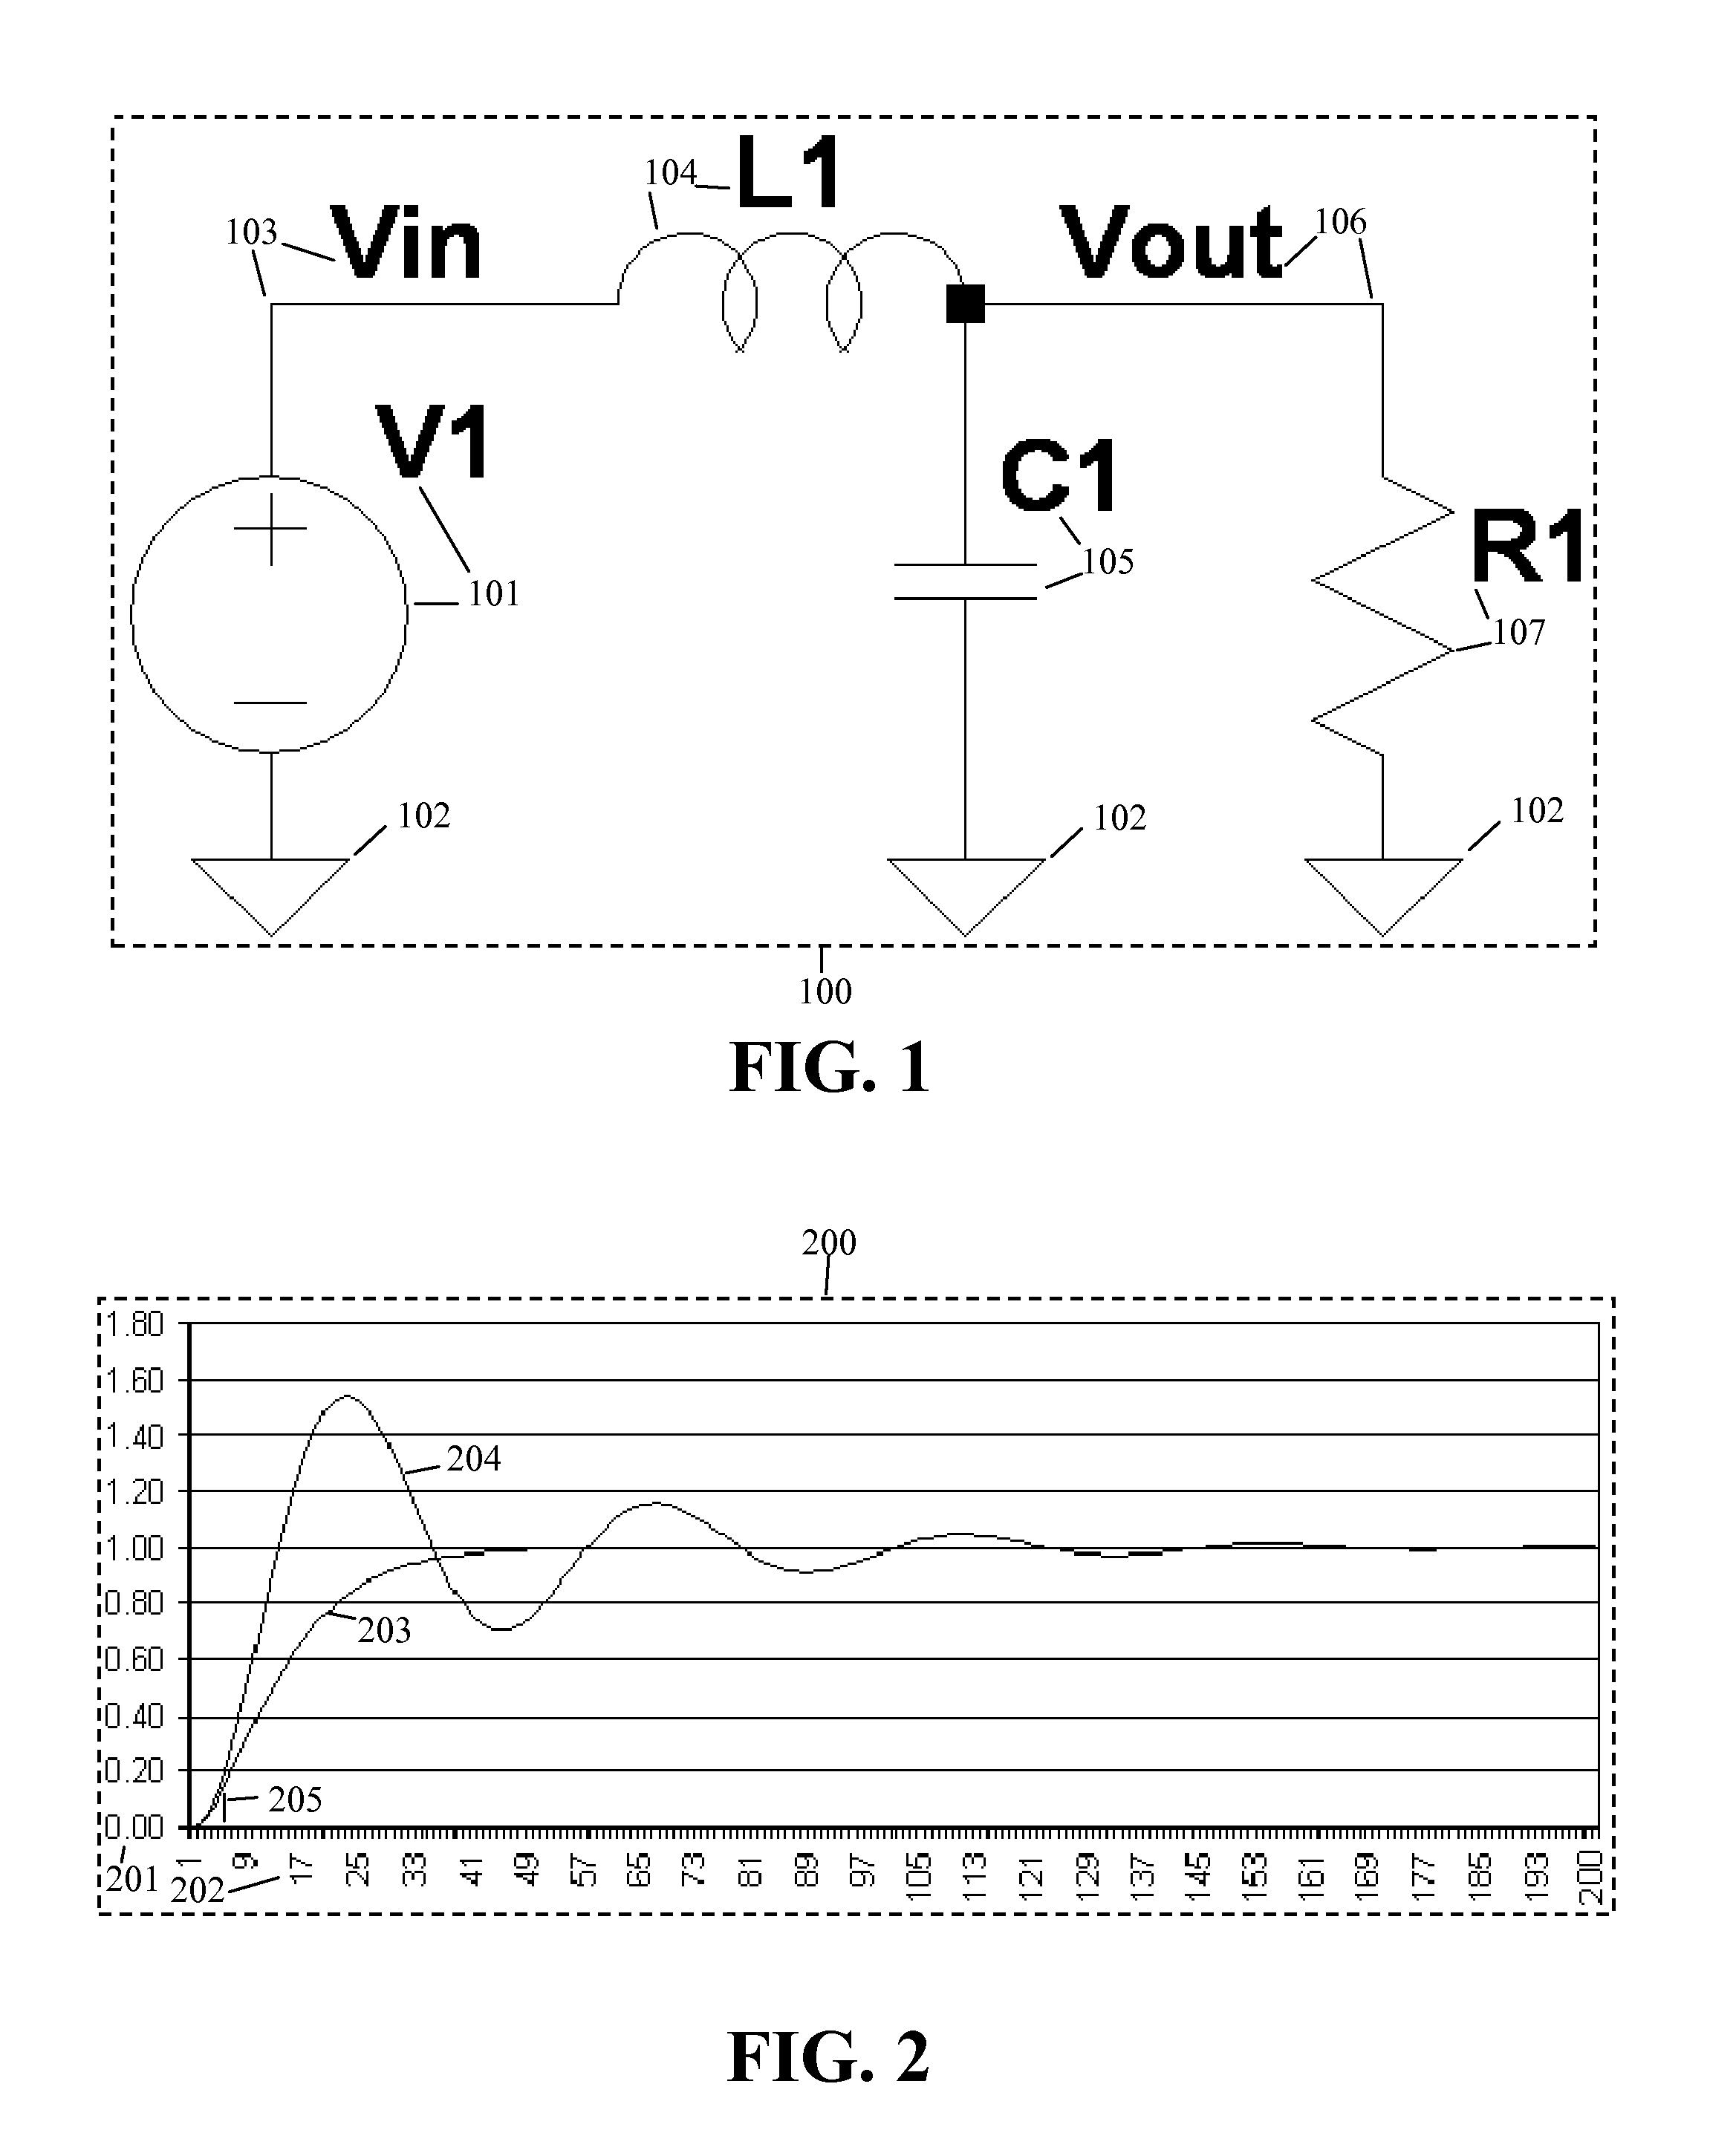 Pulse width modulation sequence generating a near critical damped step response